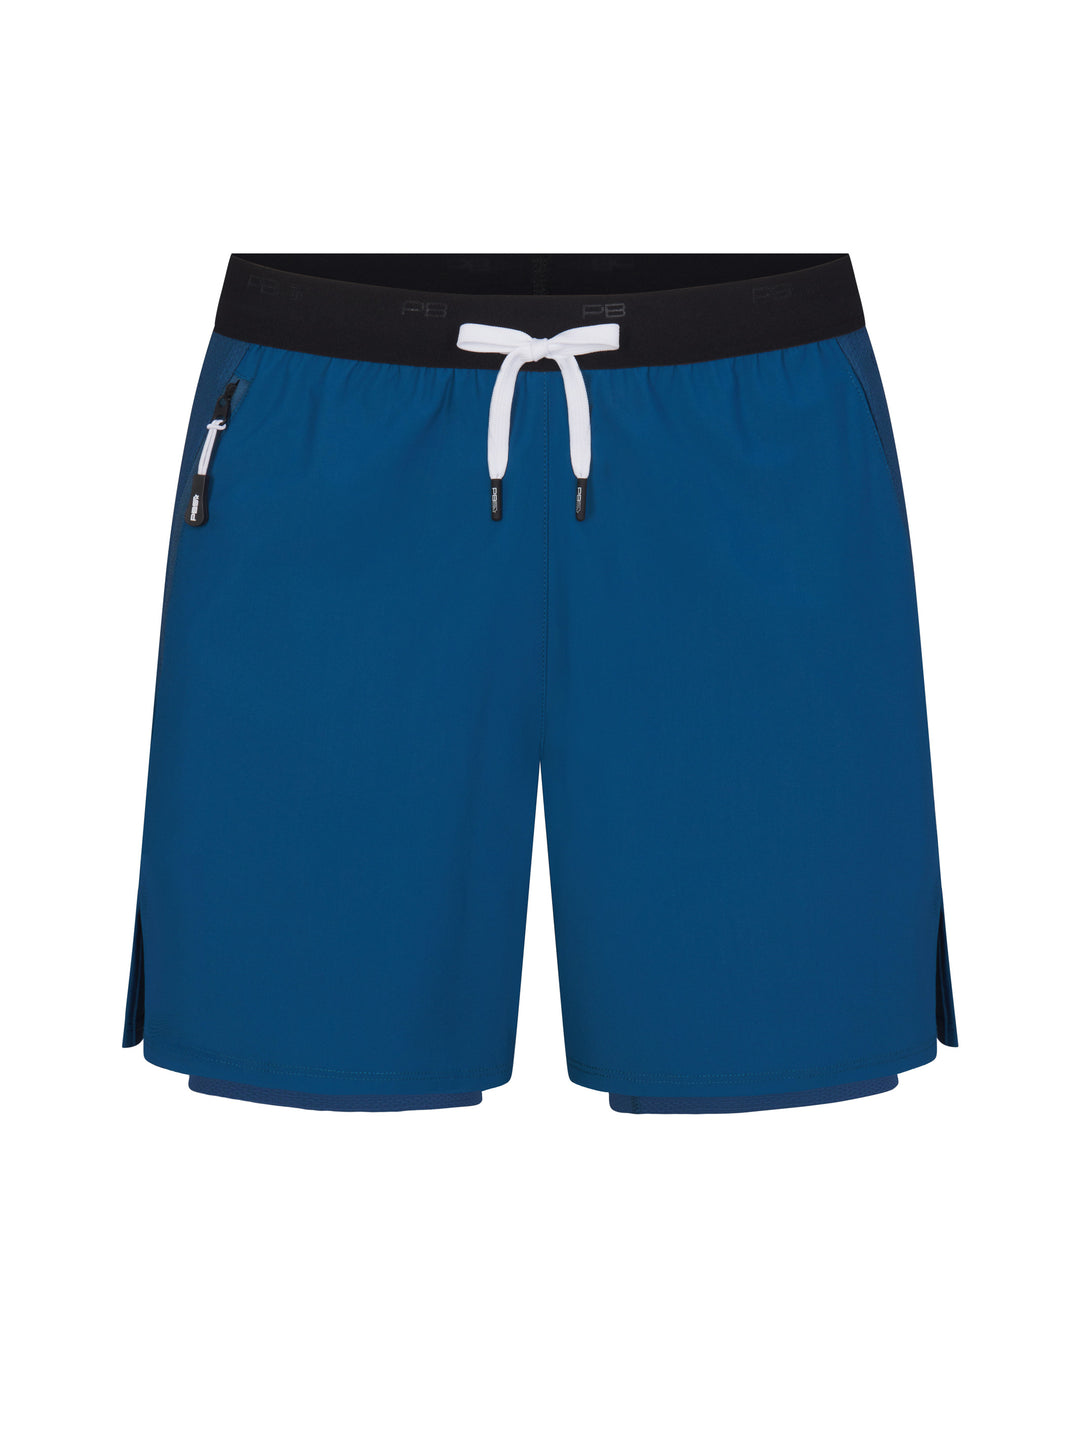 Men's Signature Court Short in astral blue with black waistband with white drawstring.